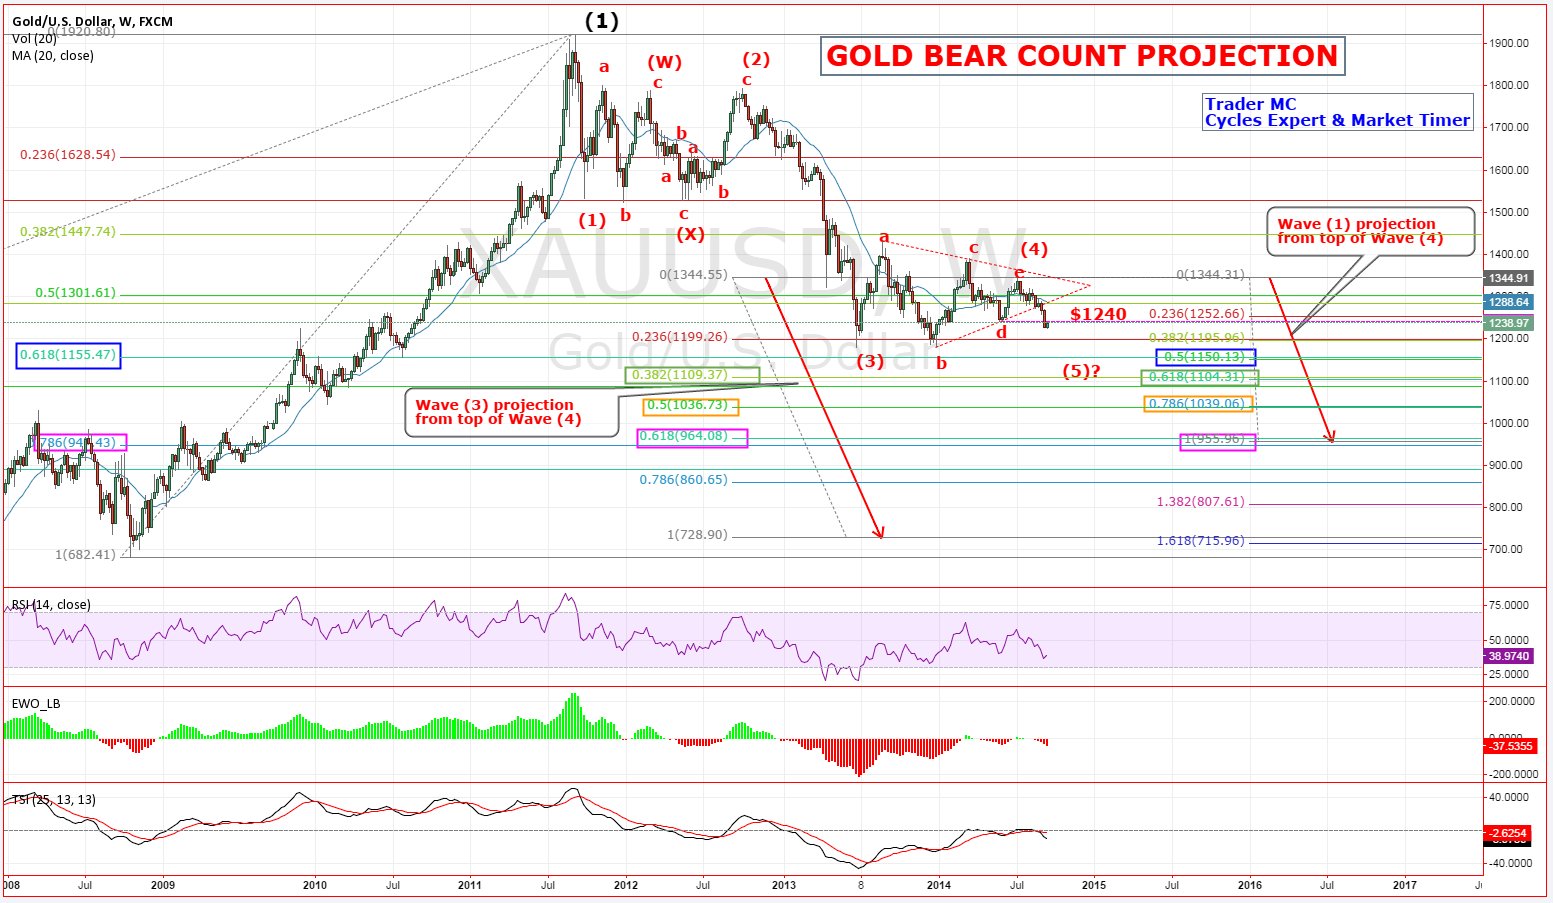 Gold's Bear-Count Projection